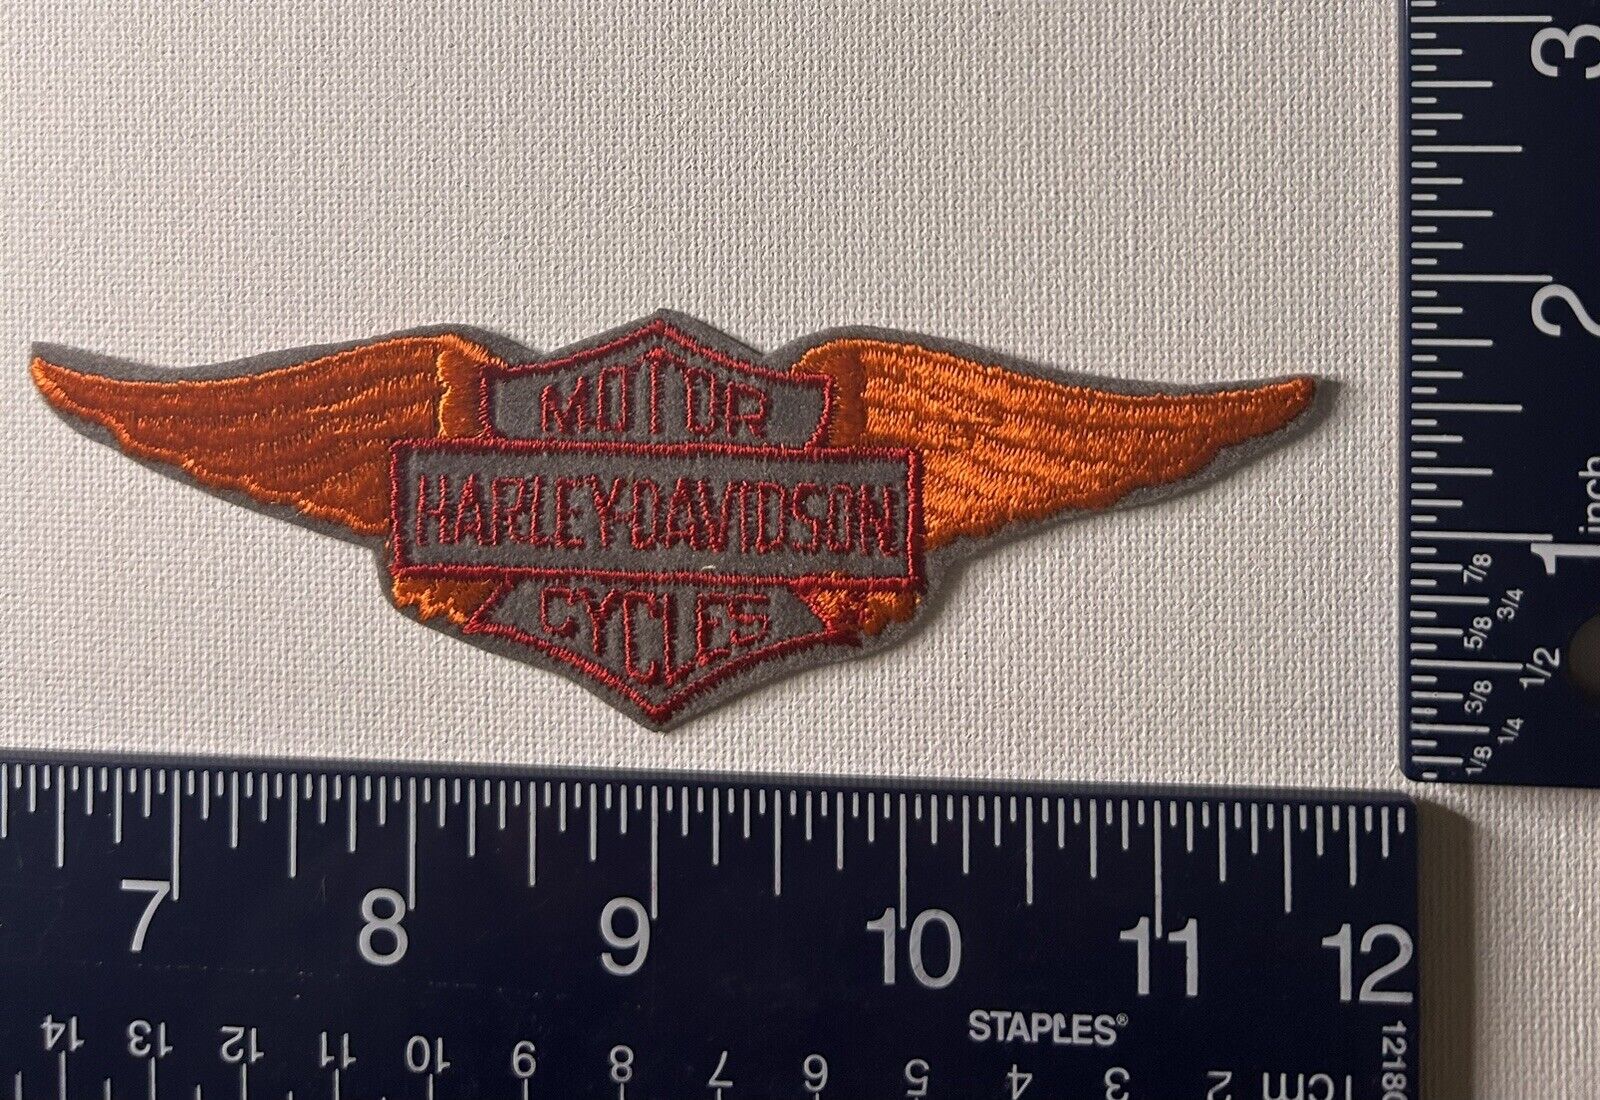 Authentic Vintage Harley-Davidson Patches / Emblems Rare Orange Wings And Shield